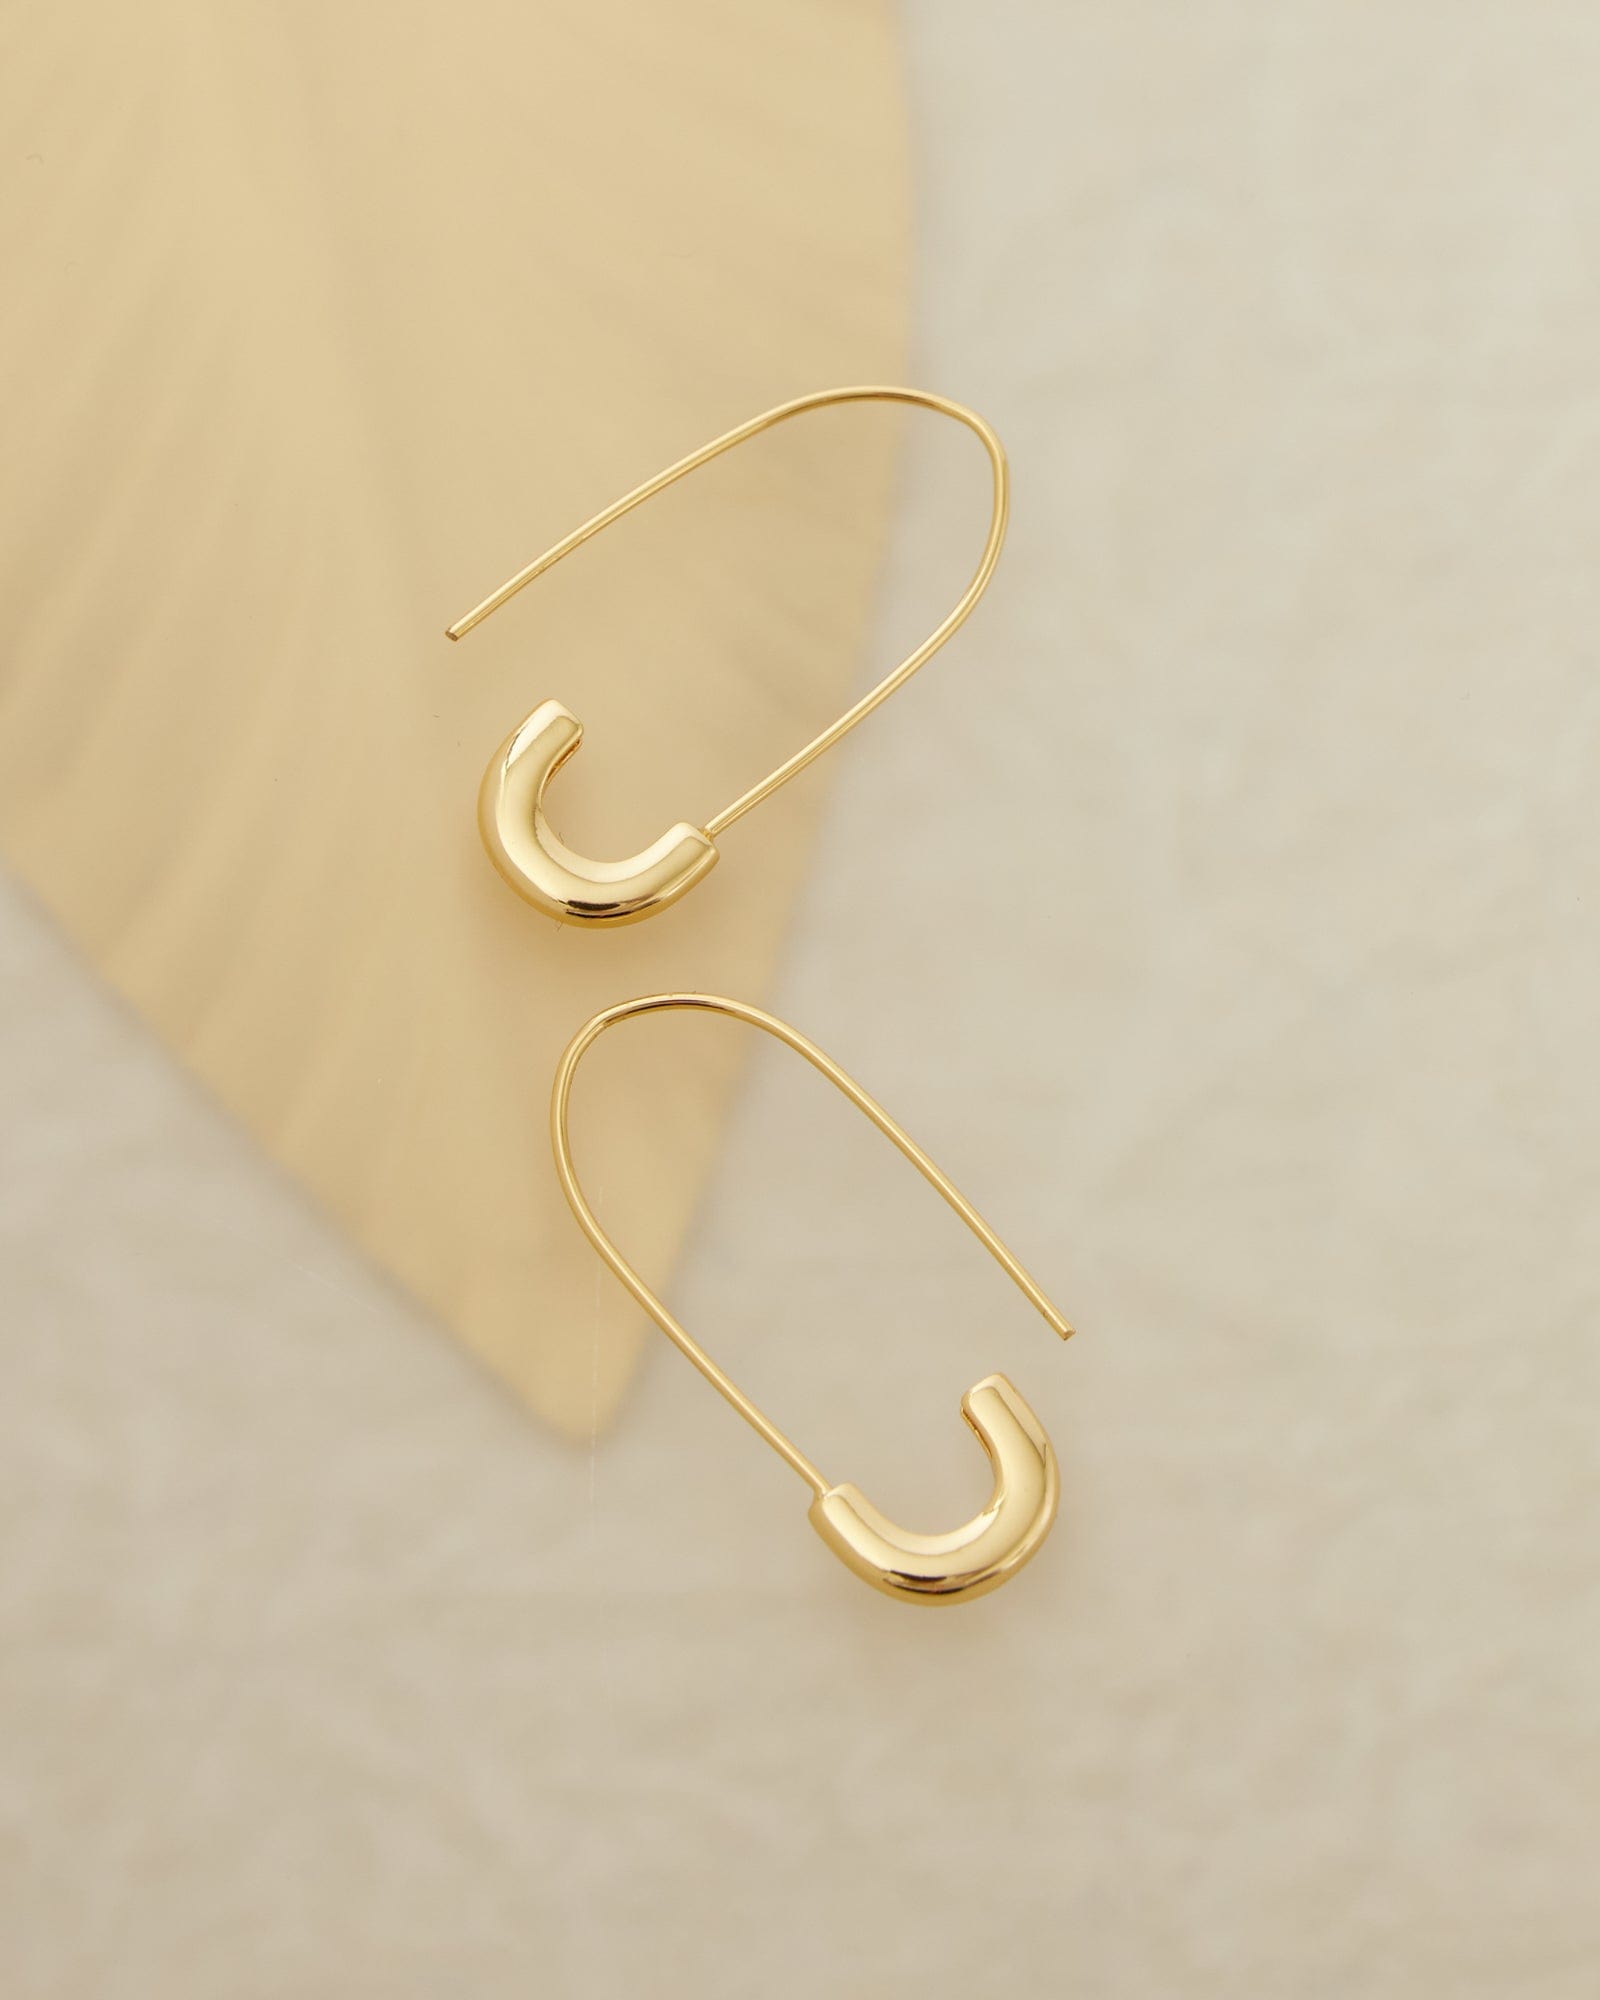 Two gold earrings resembling safety pins